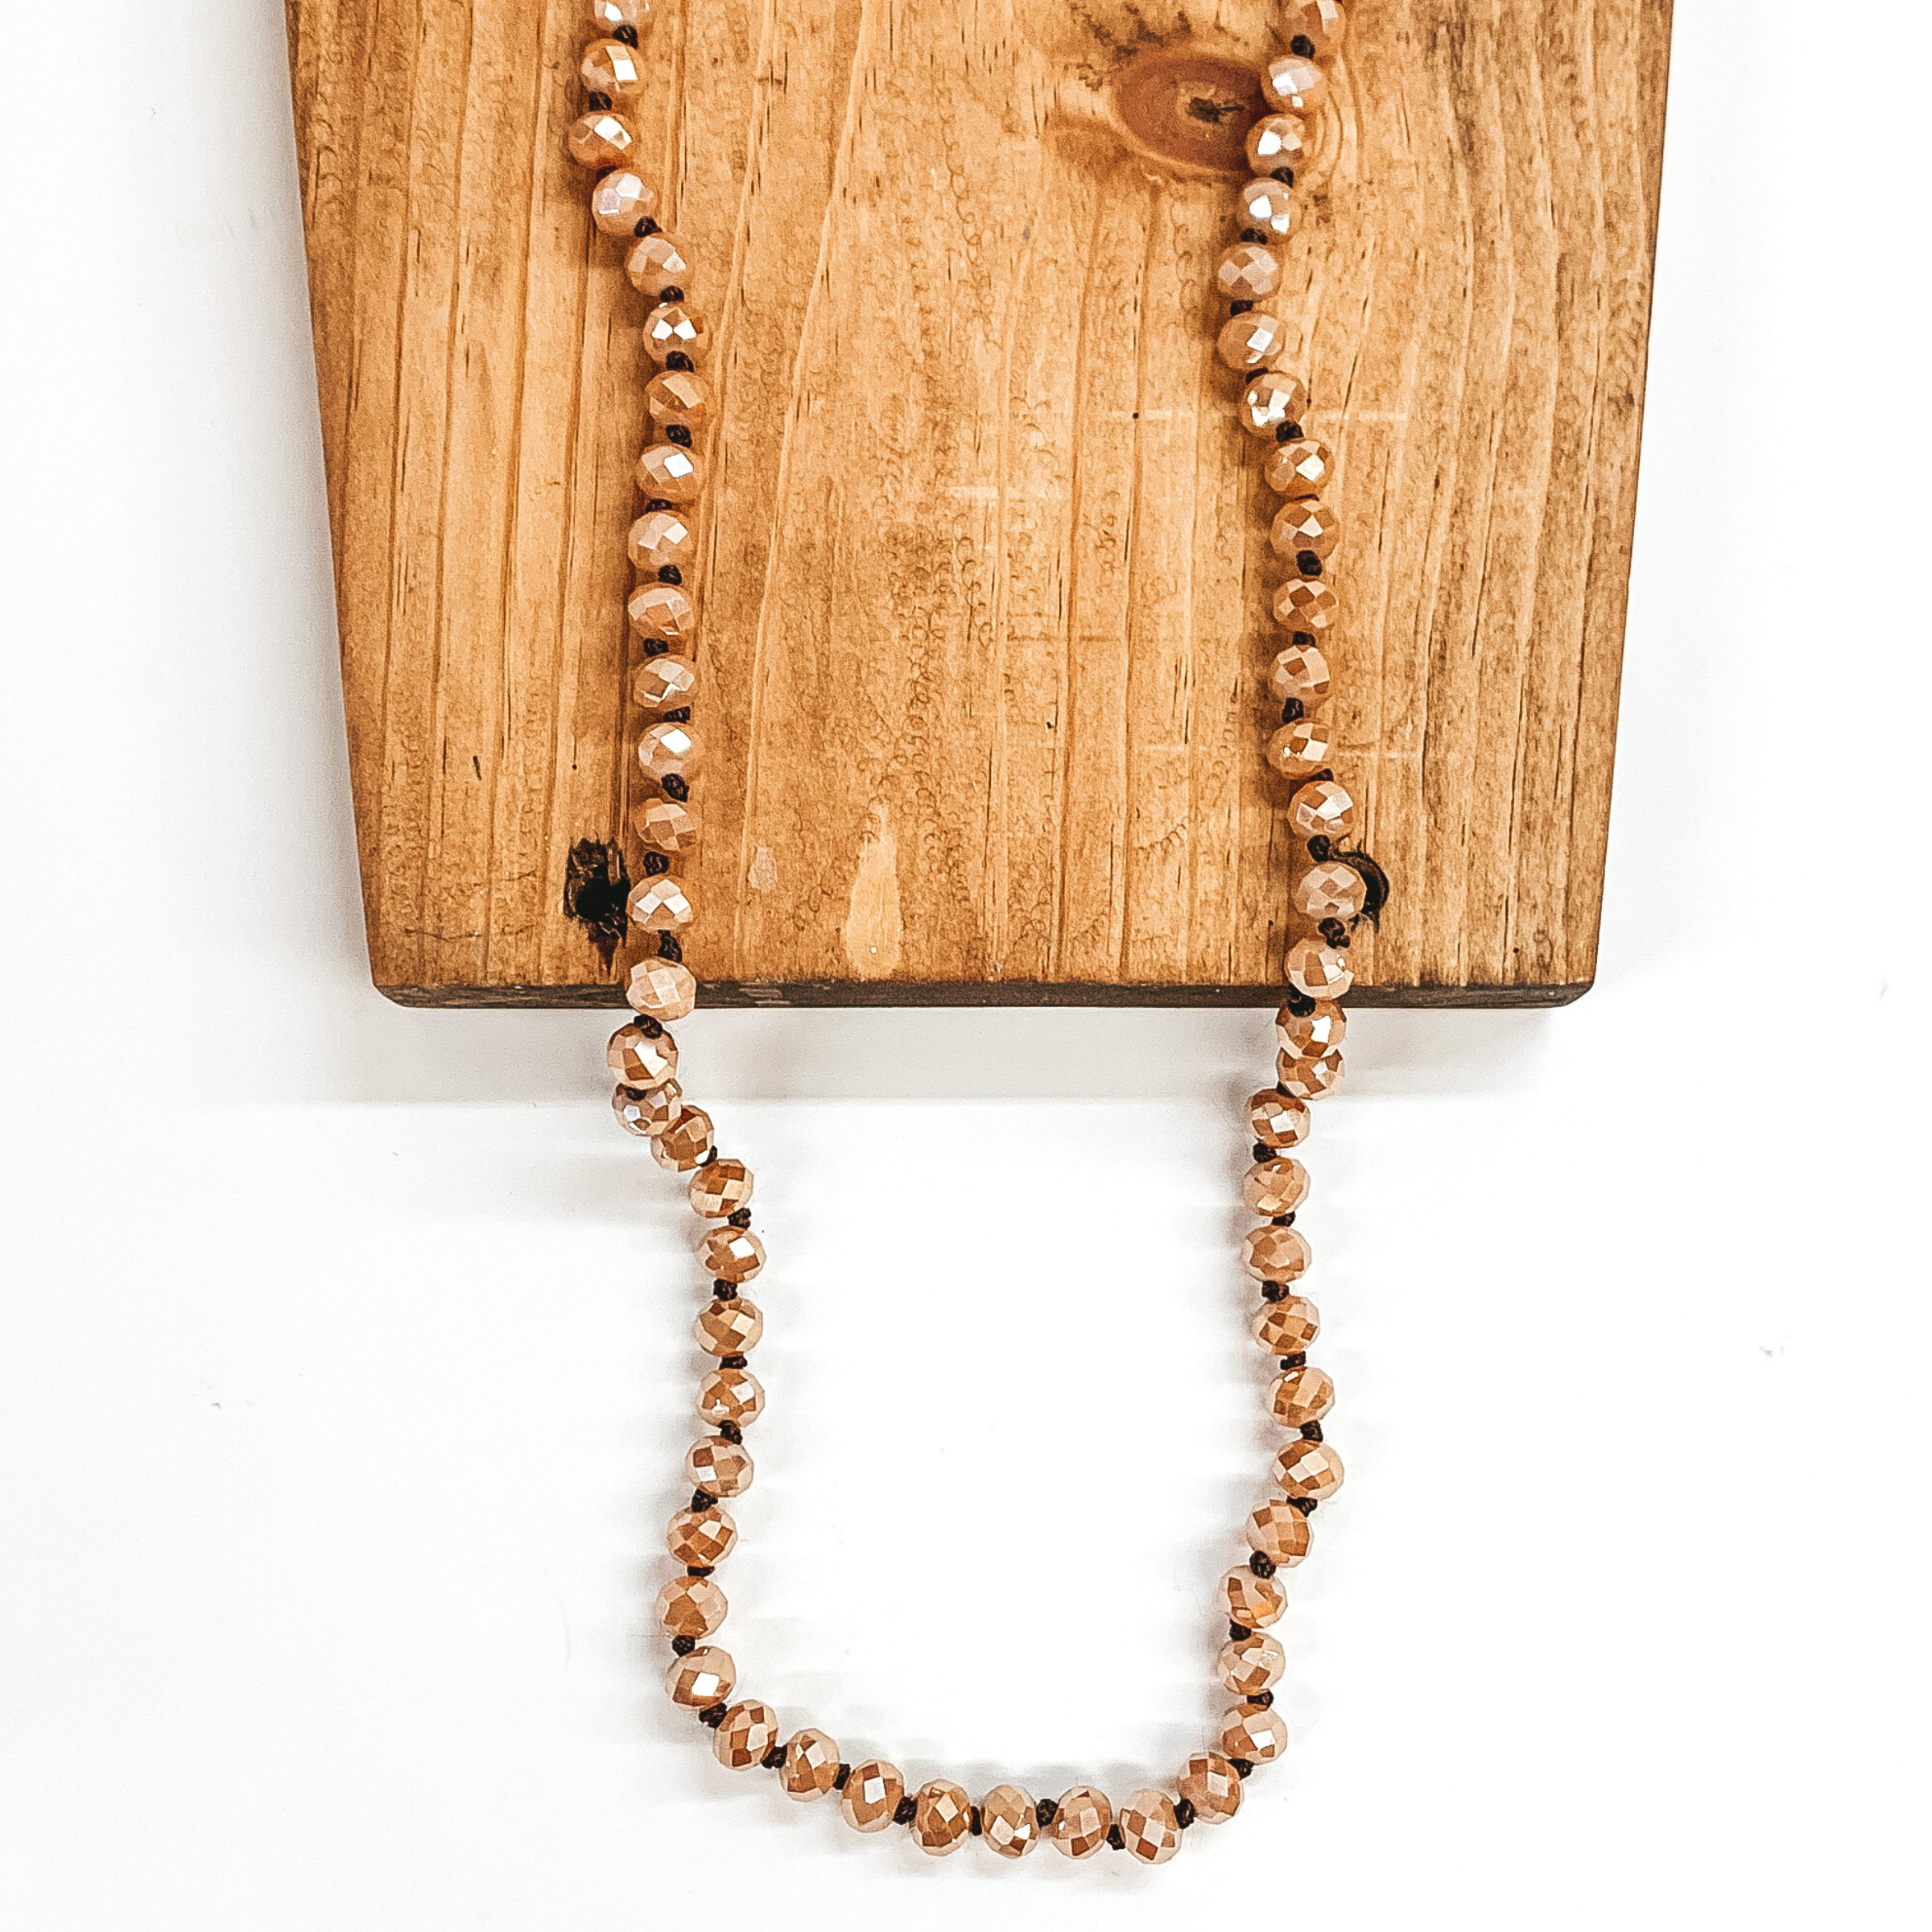 Latte crystal beaded necklace. This necklace is pictured on a brown block on a white background.